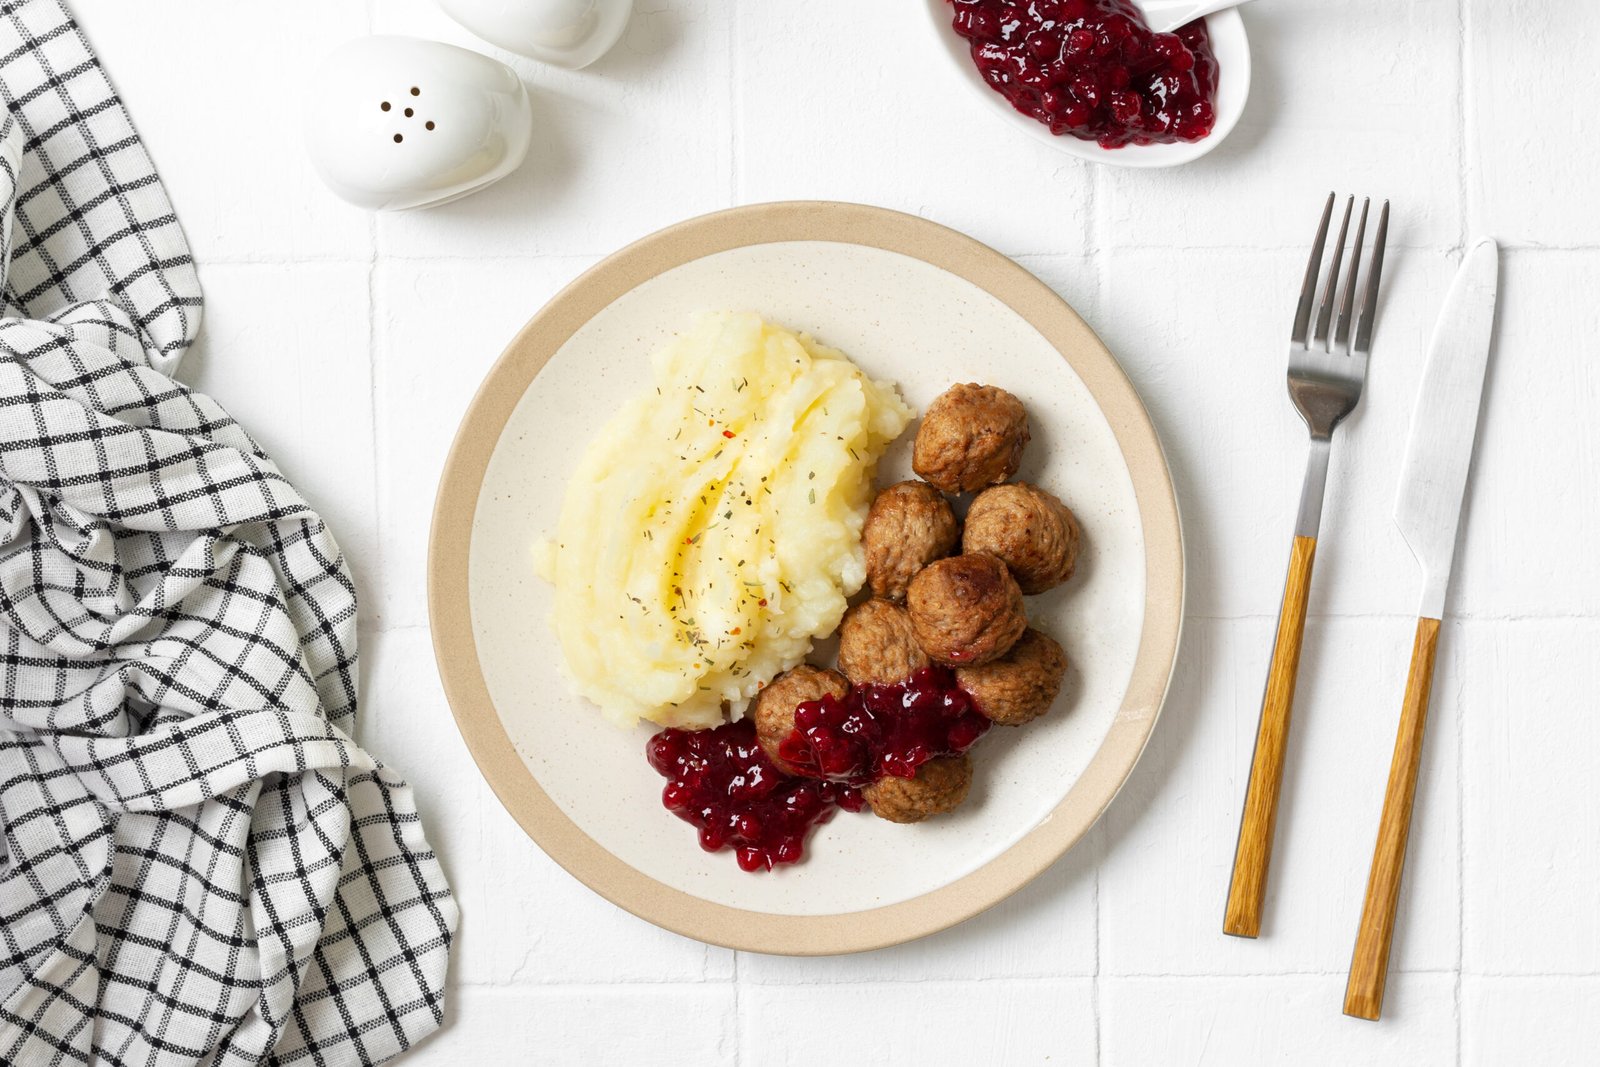 Swedish,Meatballs,With,Mashed,Potatoes,And,Lingonberry,Jam,Top,View.